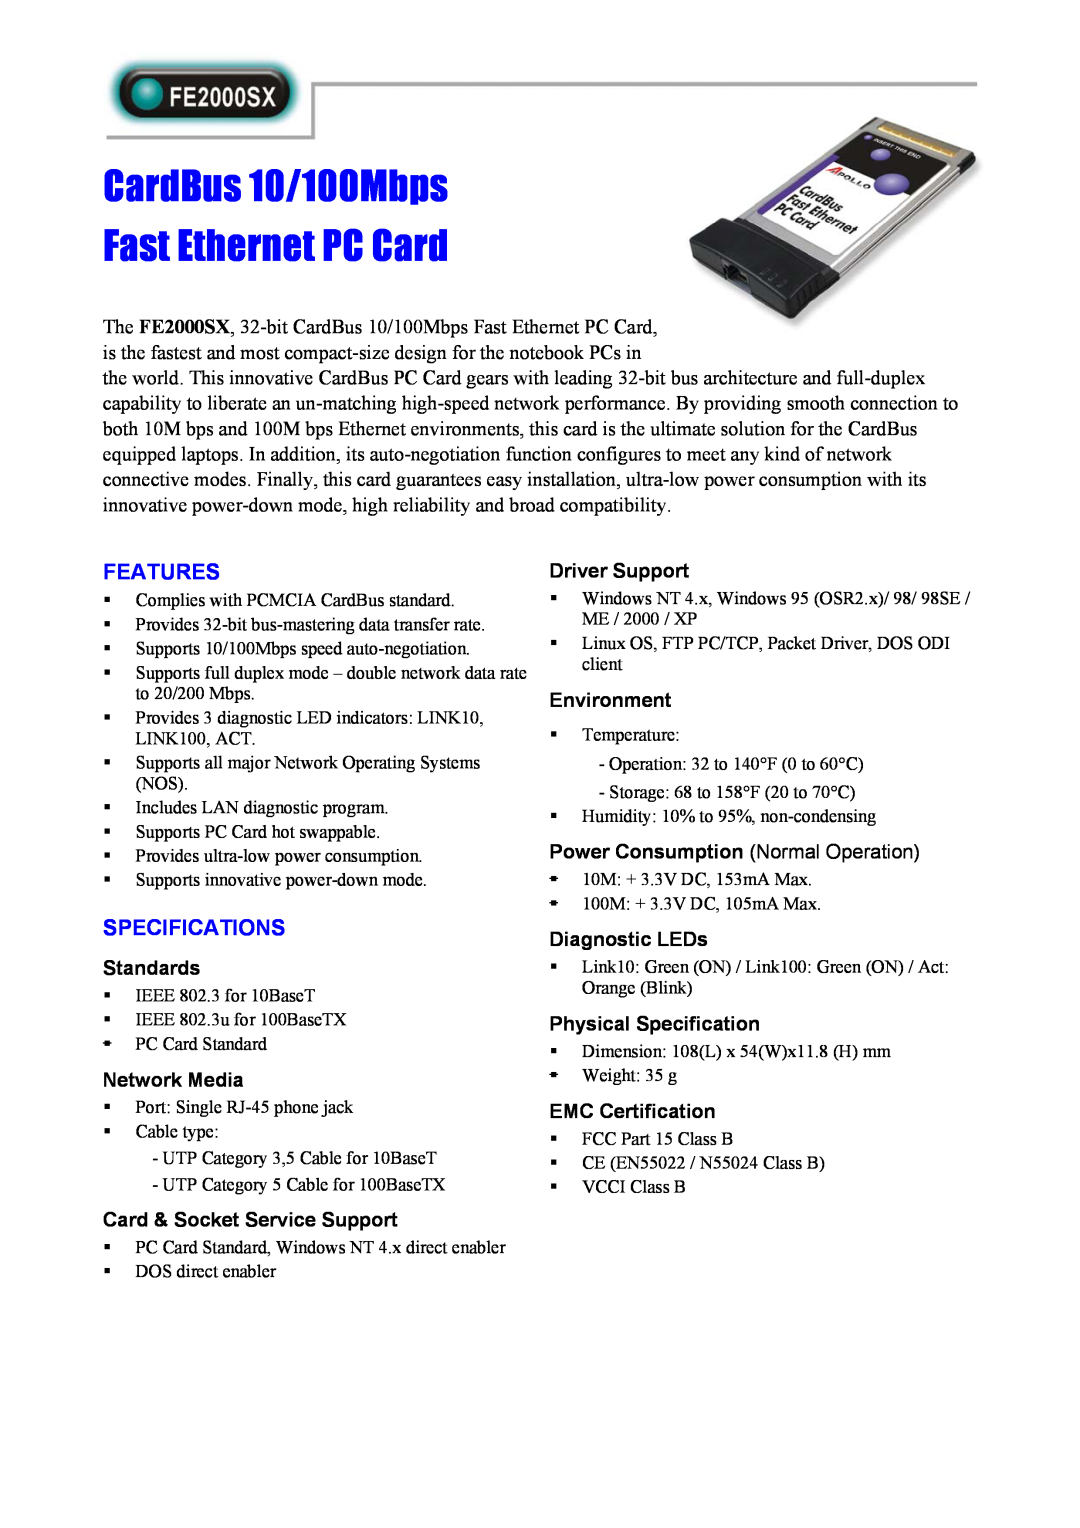 Abocom FE2000SX specifications CardBus 10/100Mbps Fast Ethernet PC Card, Features, Specifications, Driver Support 